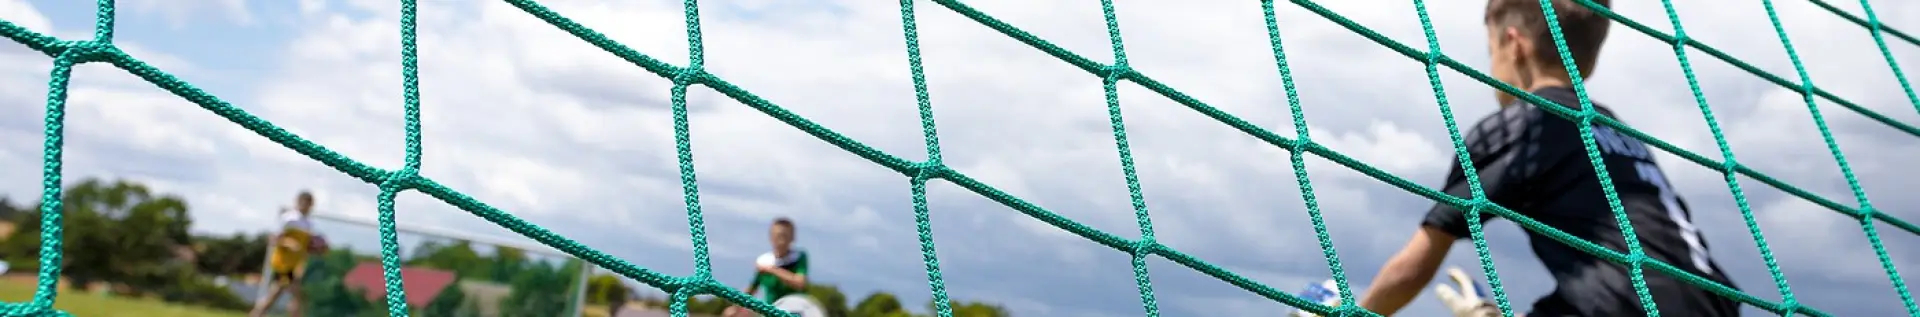 Fence nets for basketball courts